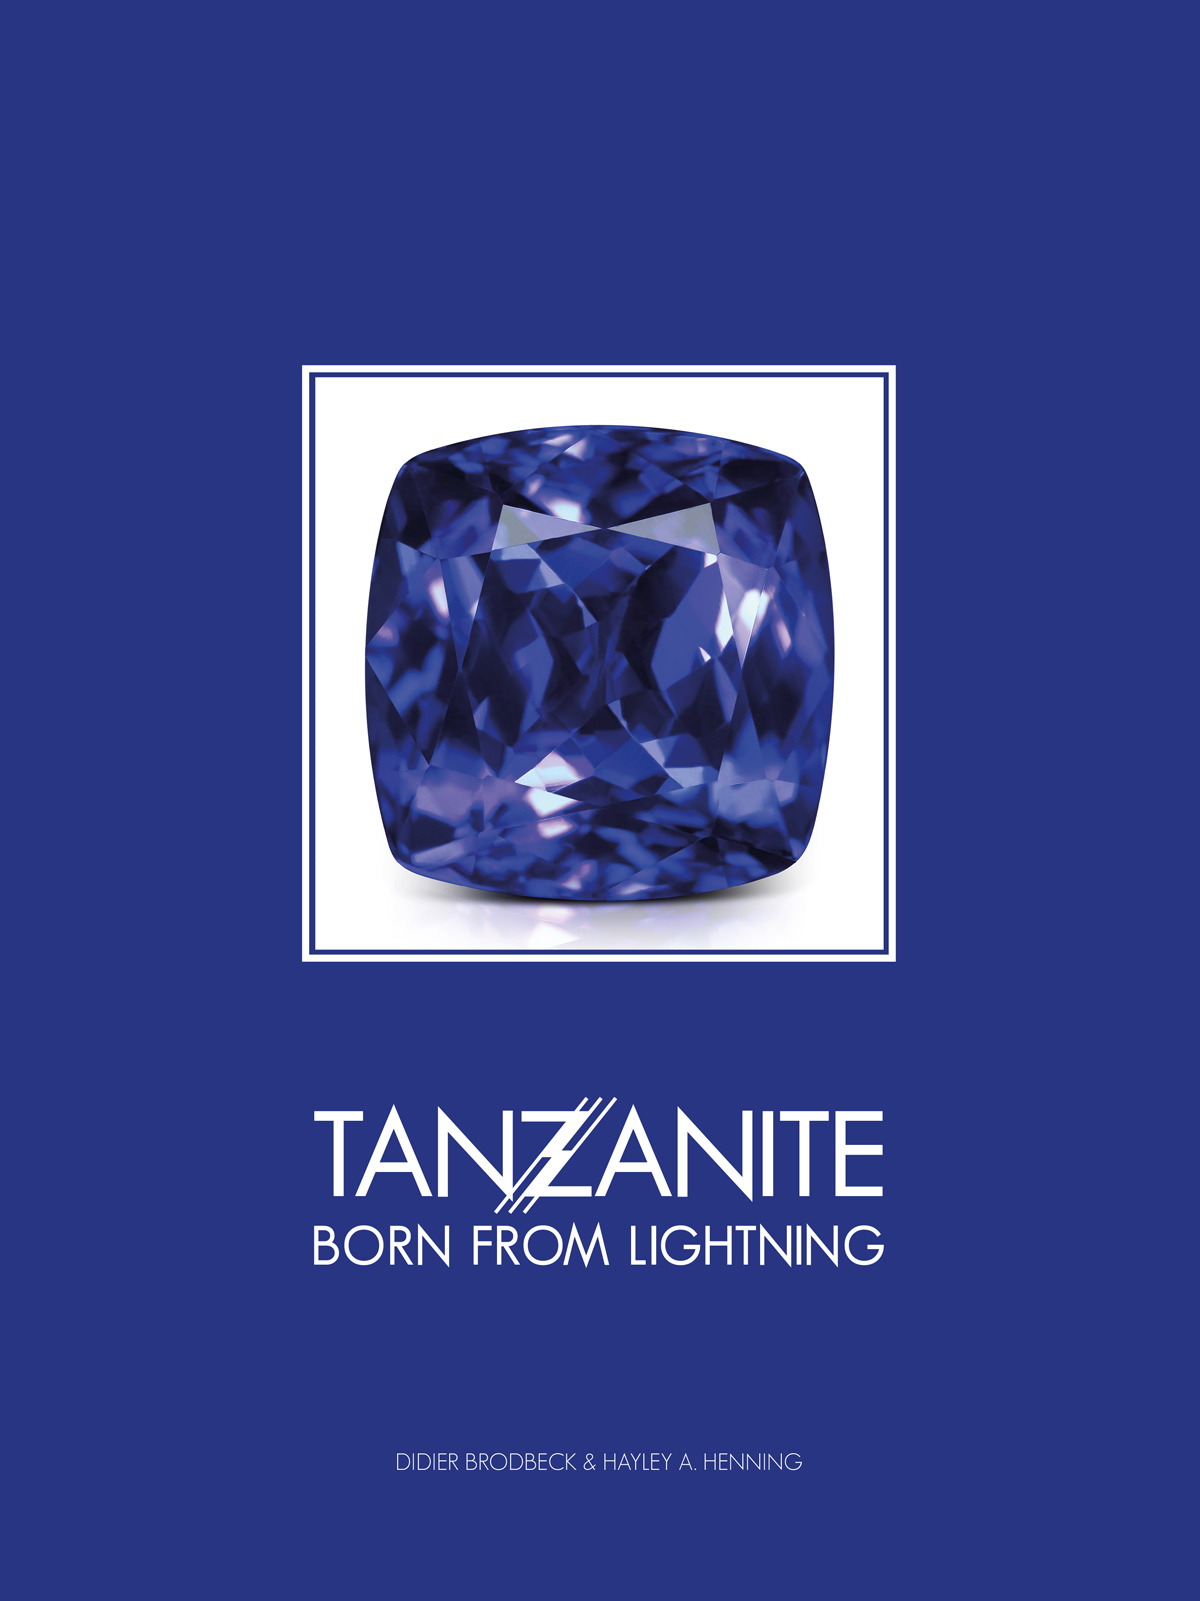 Tanzanite: Born from Lightning book by Didier Brodbeck and Hayley Henning